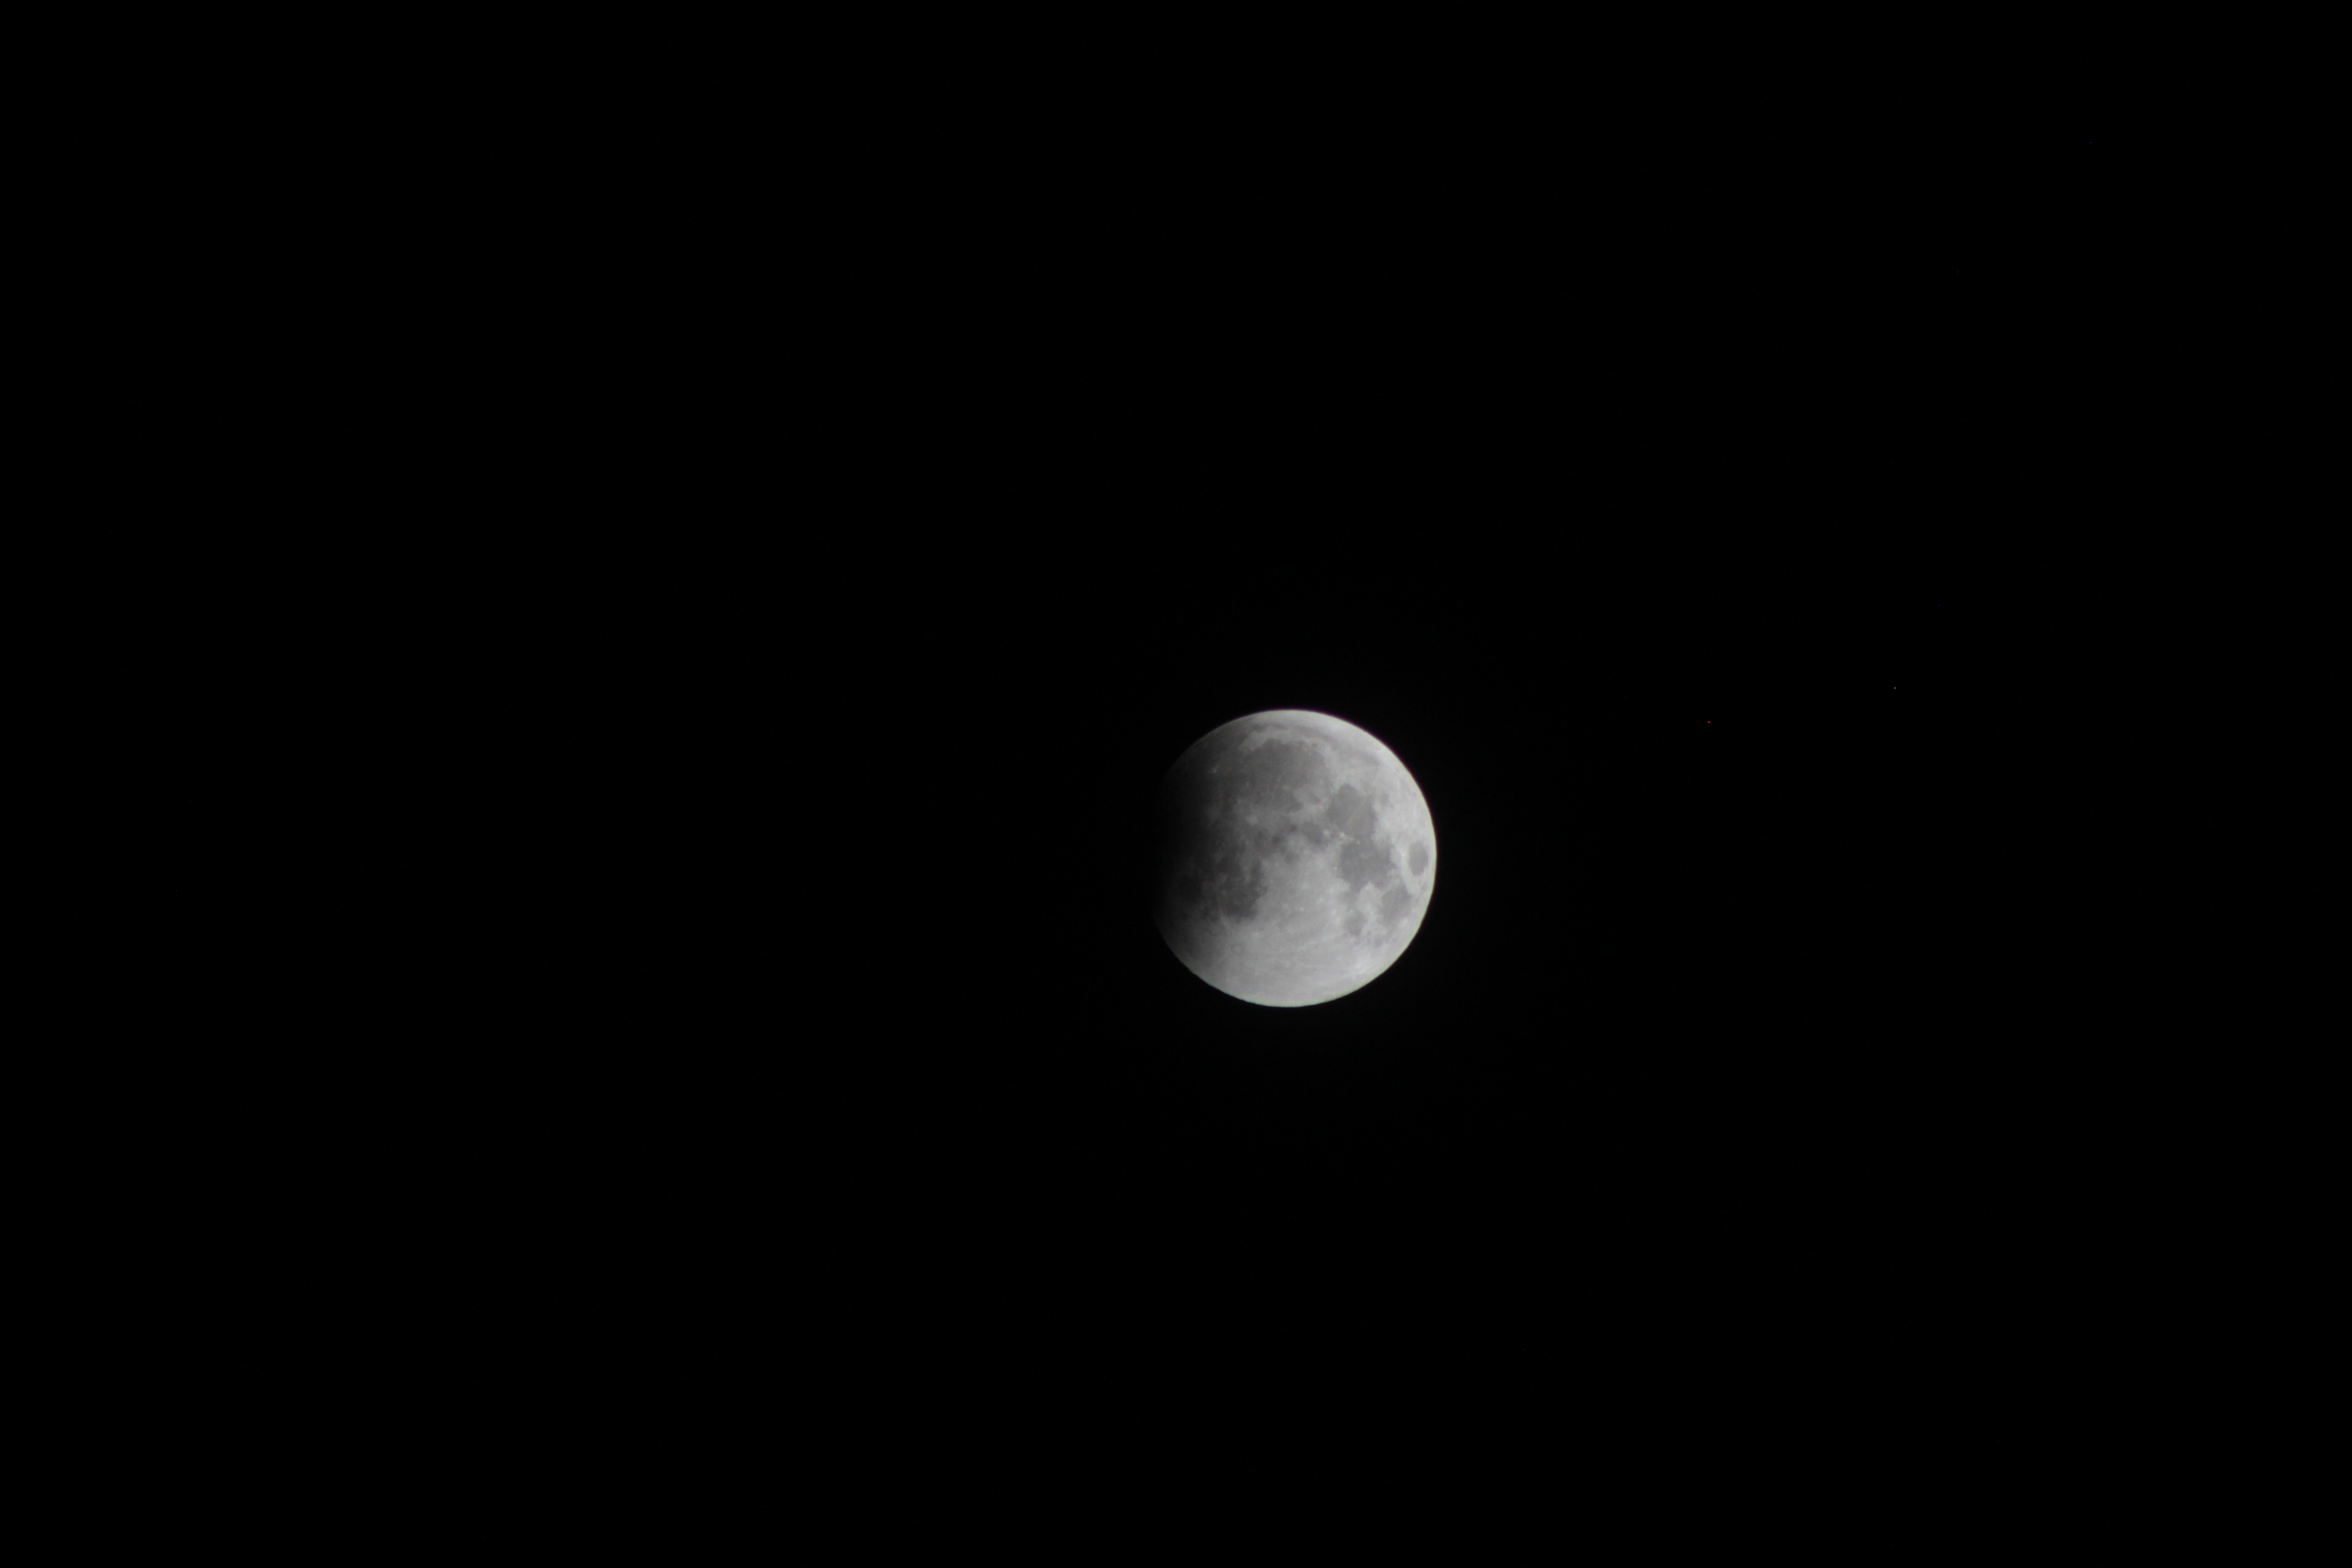 First image of the recent Lunar eclipse by Pam Foster